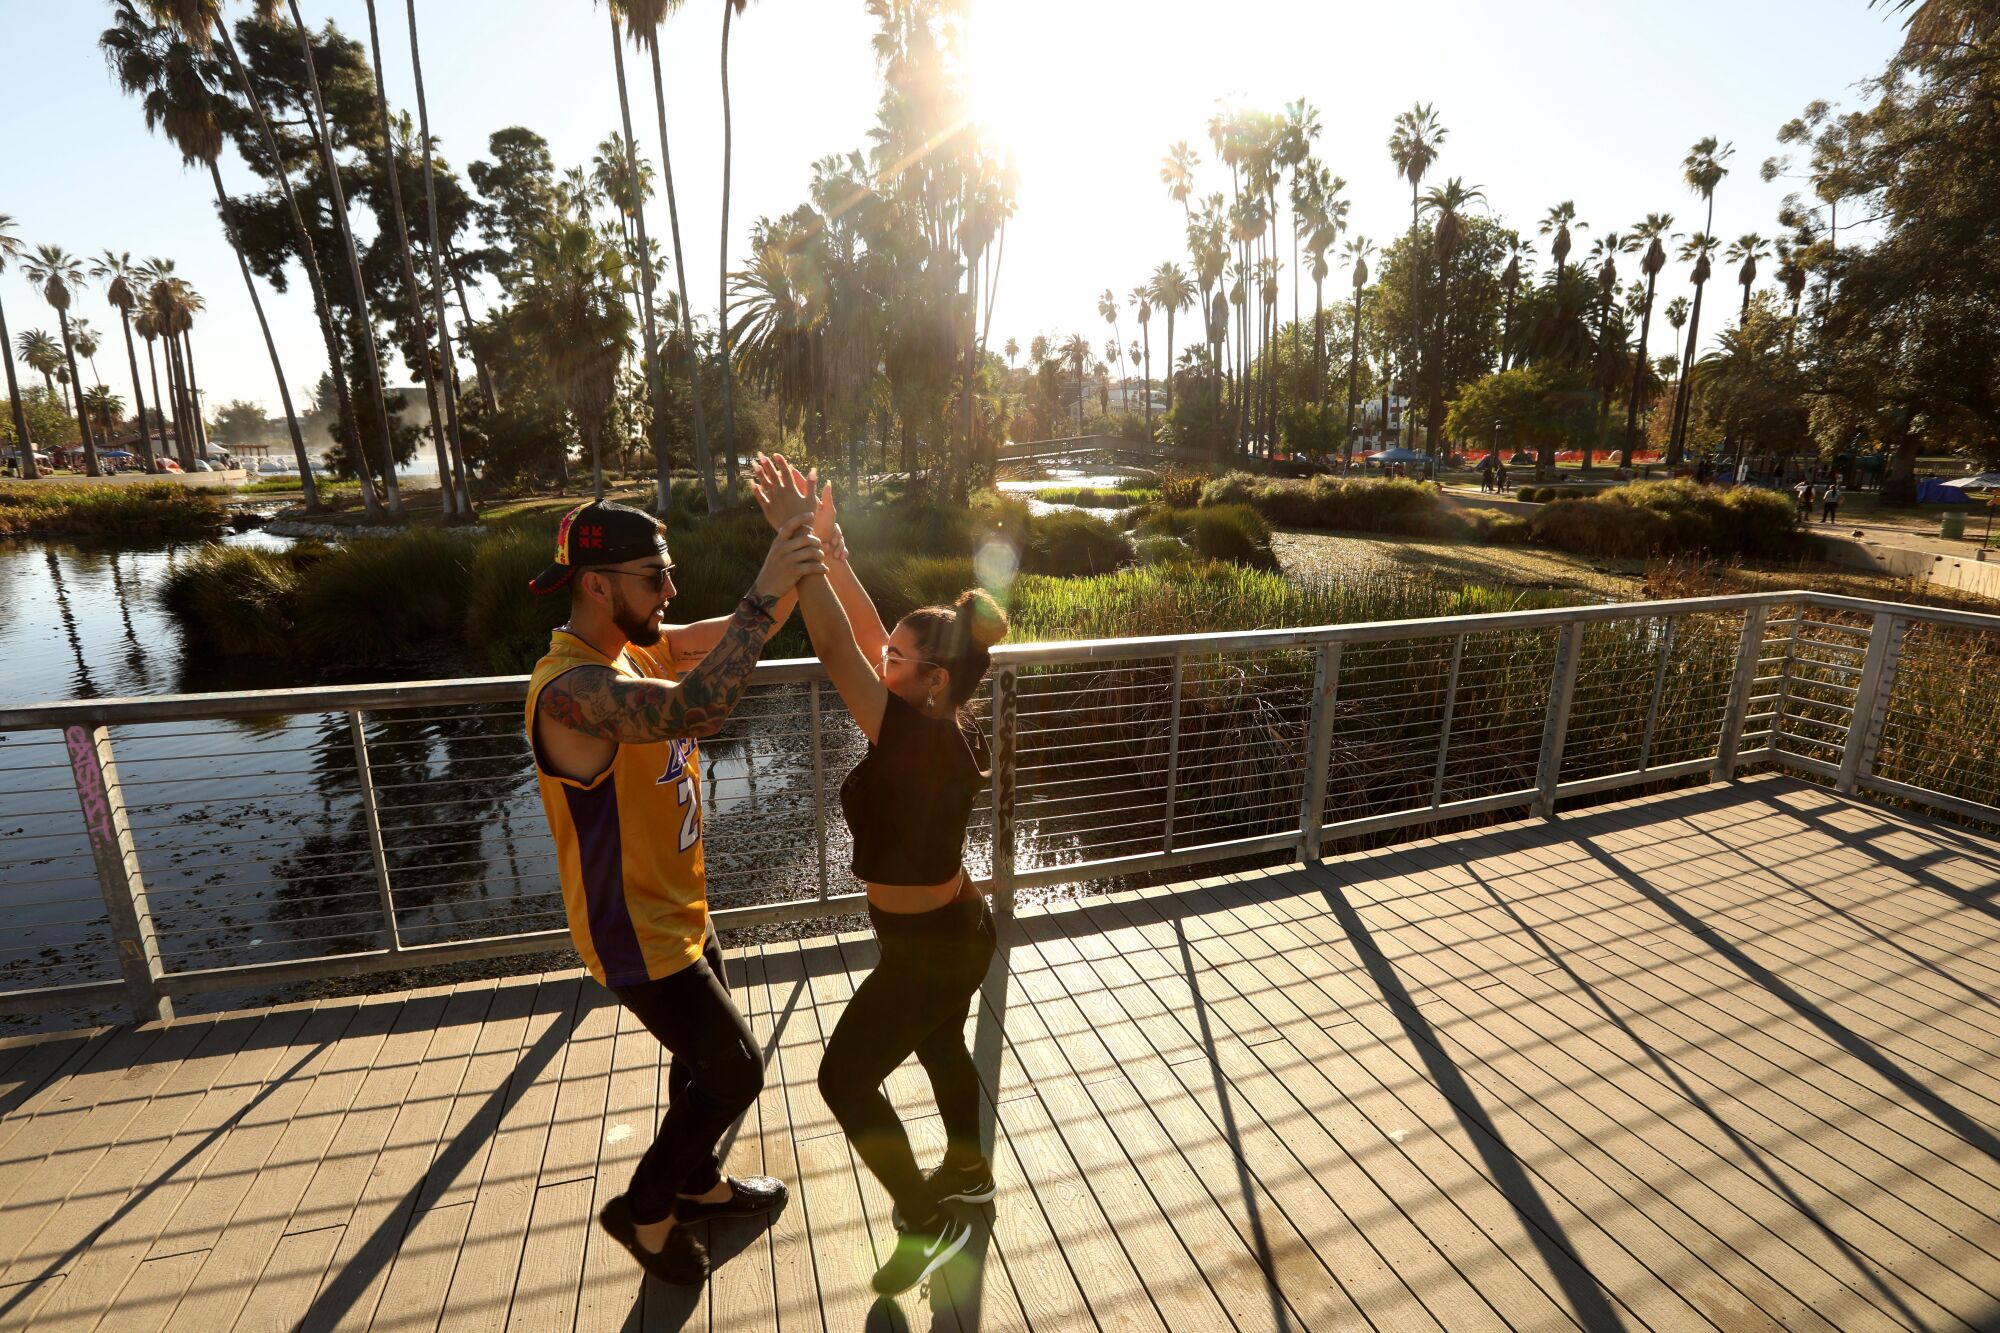 A man in a Lakers jersey and a woman dance on a platform next to a lake